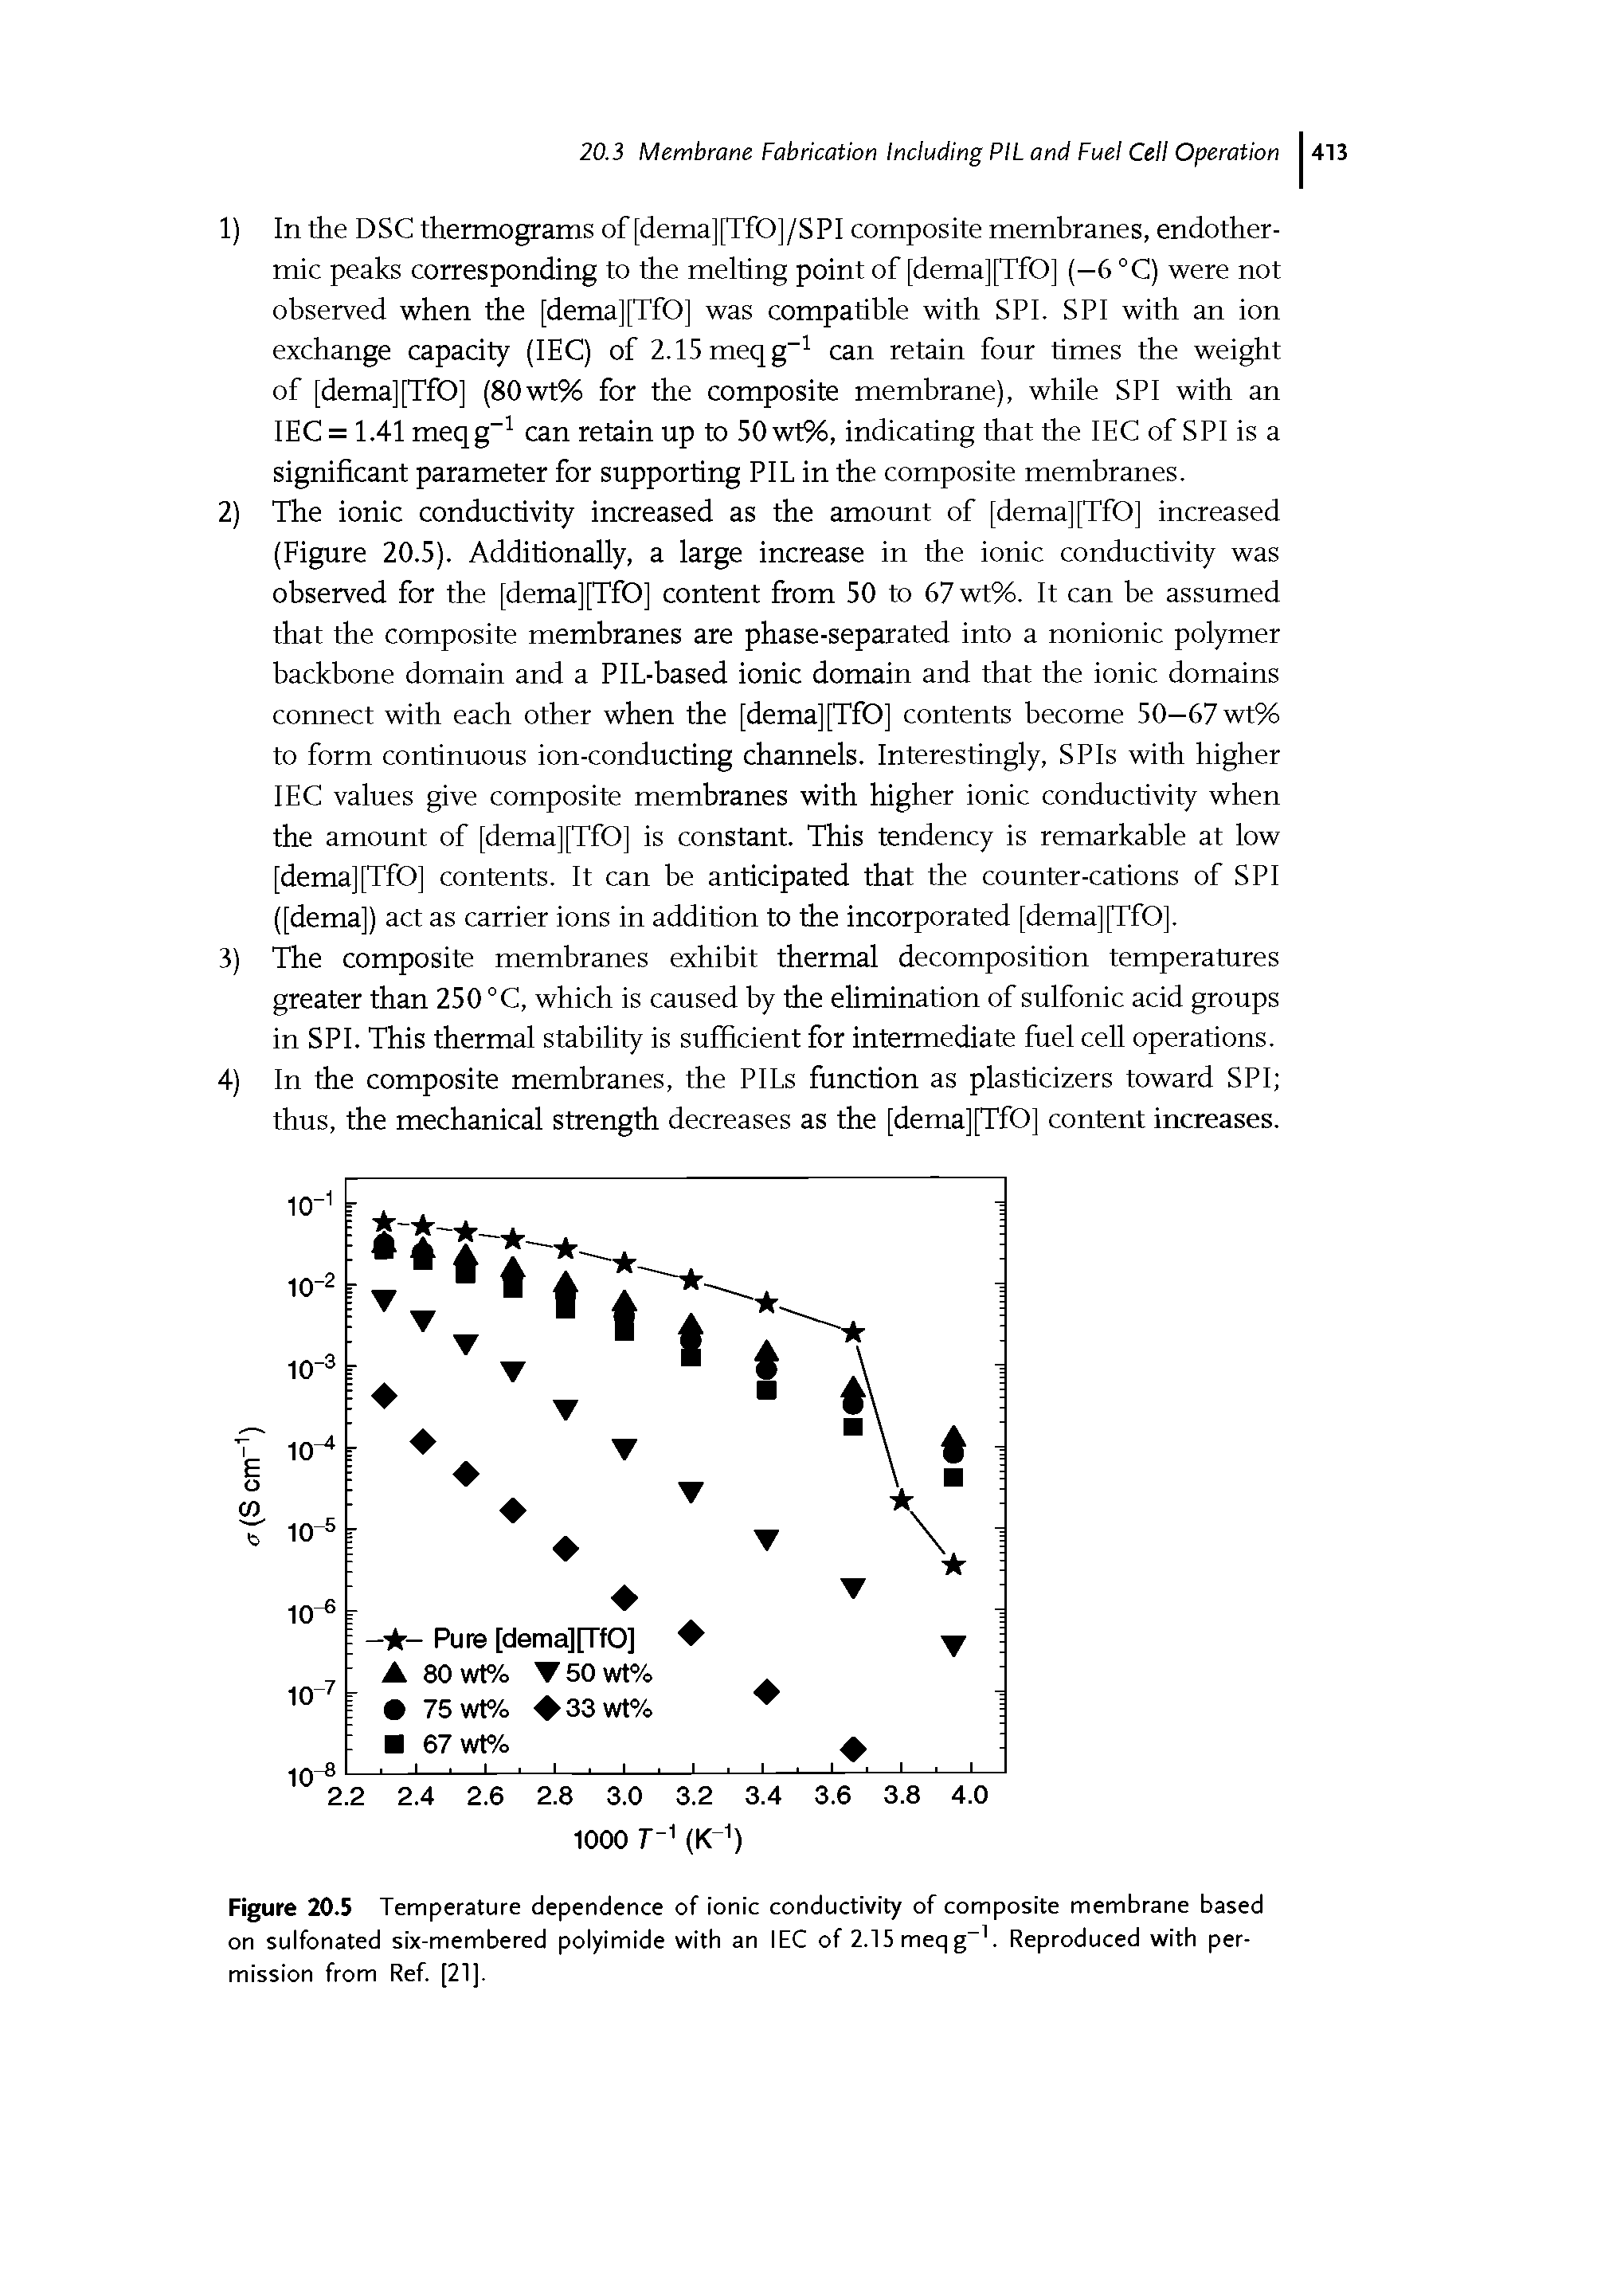 Figure 20.5 Temperature dependence of ionic conductivity of composite membrane based on sulfonated six-membered polyimide with an lEC of 2.15 meqg". Reproduced with permission from Ref. [21).